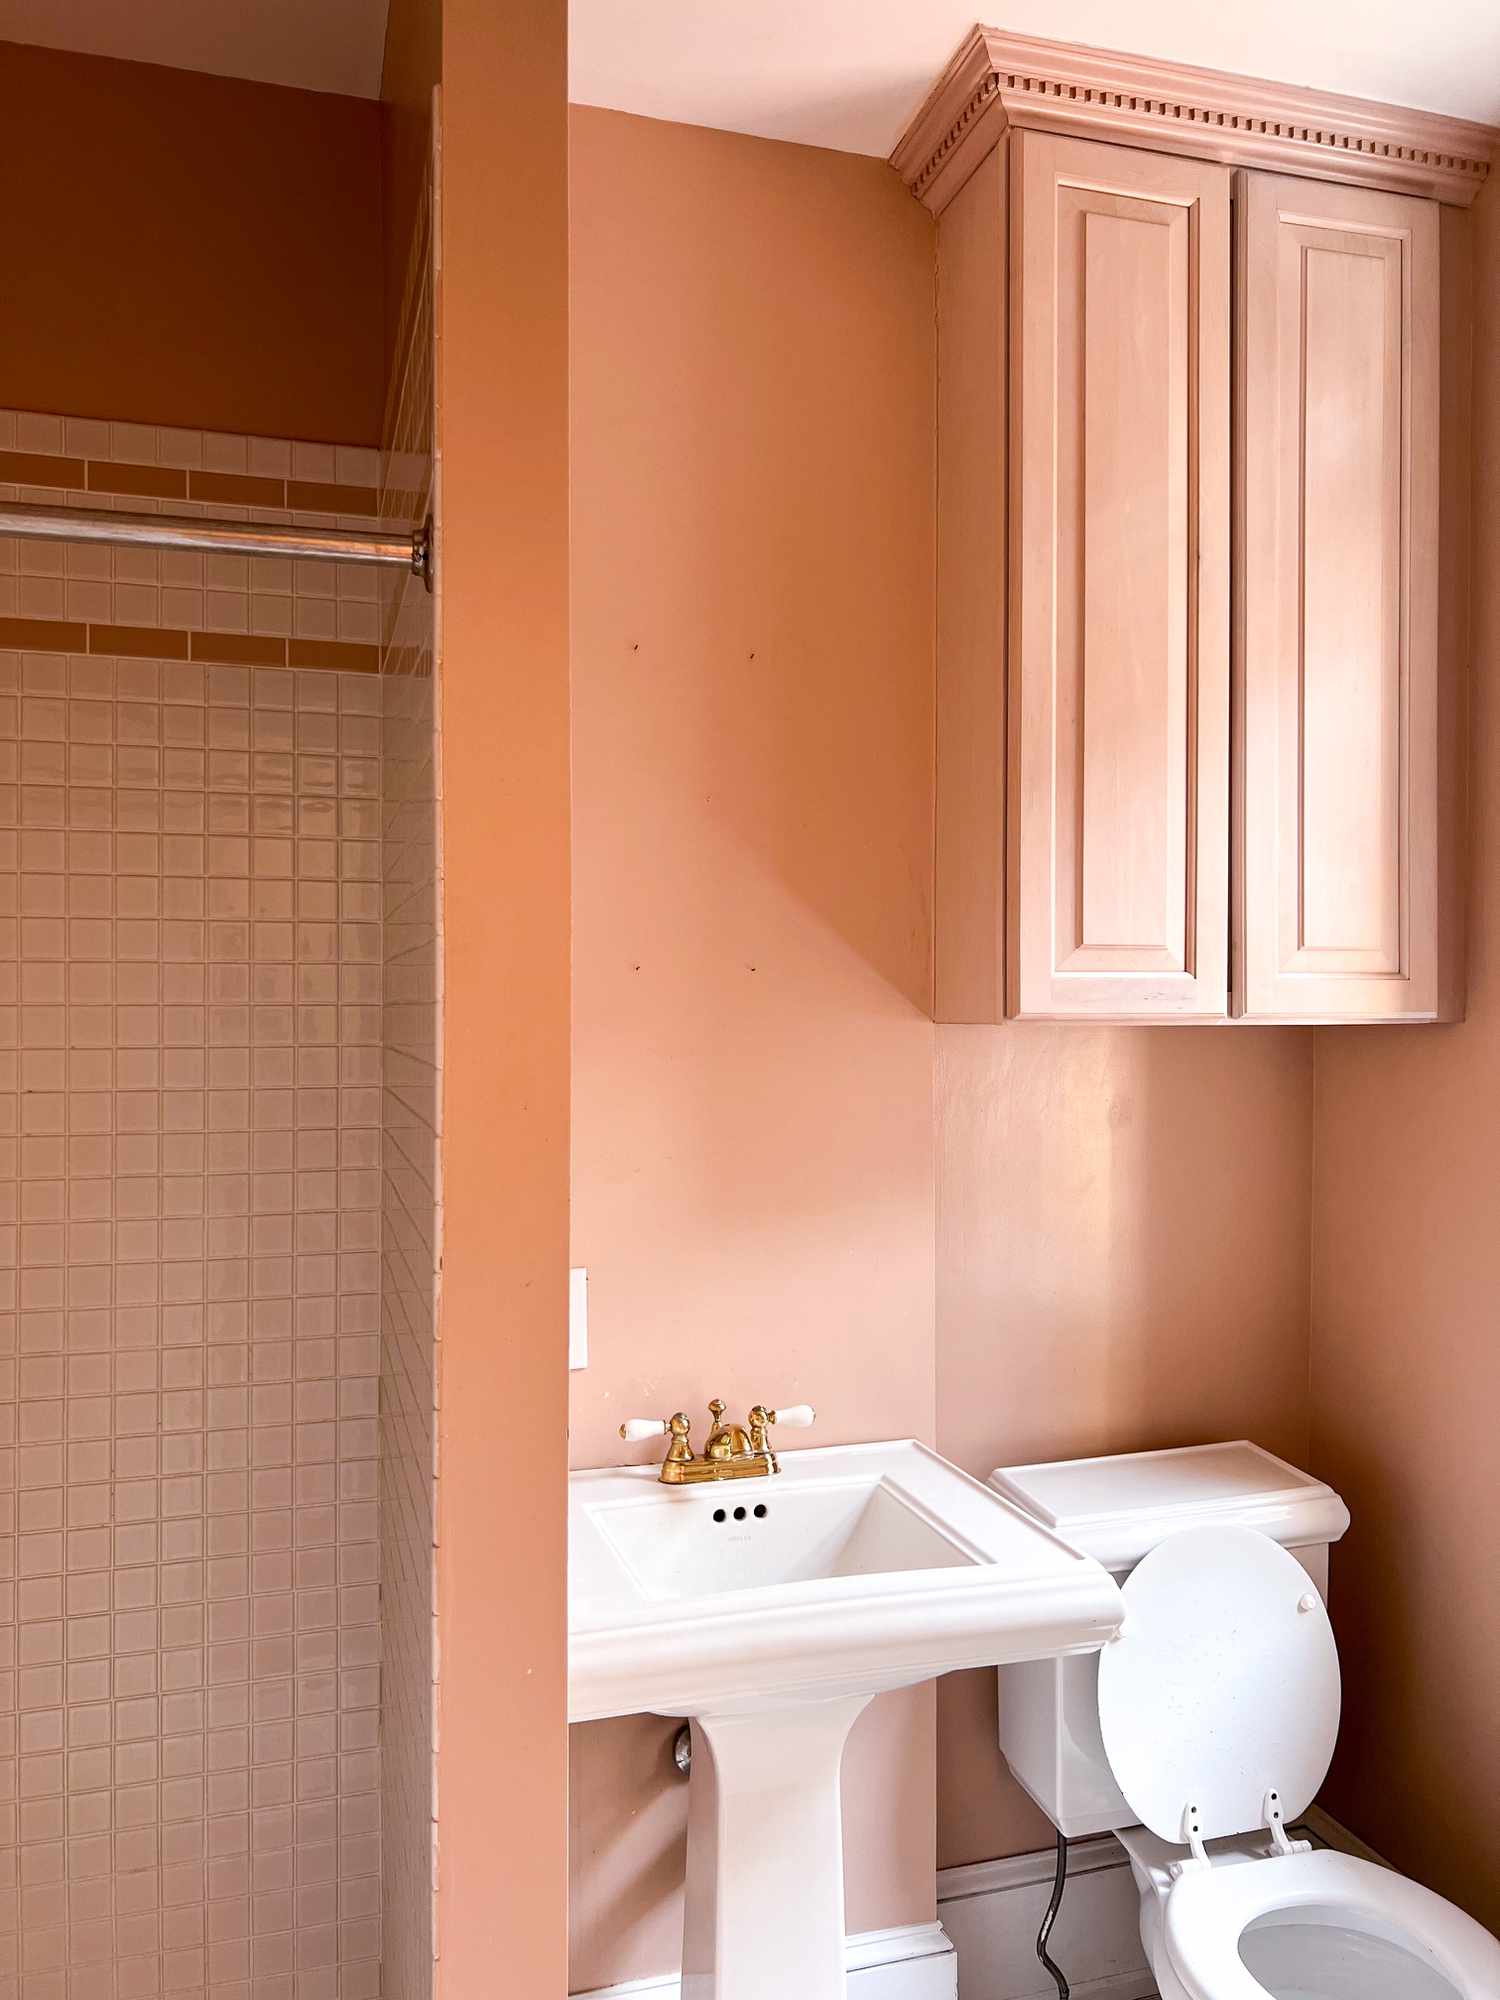 A colorful pink bathroom